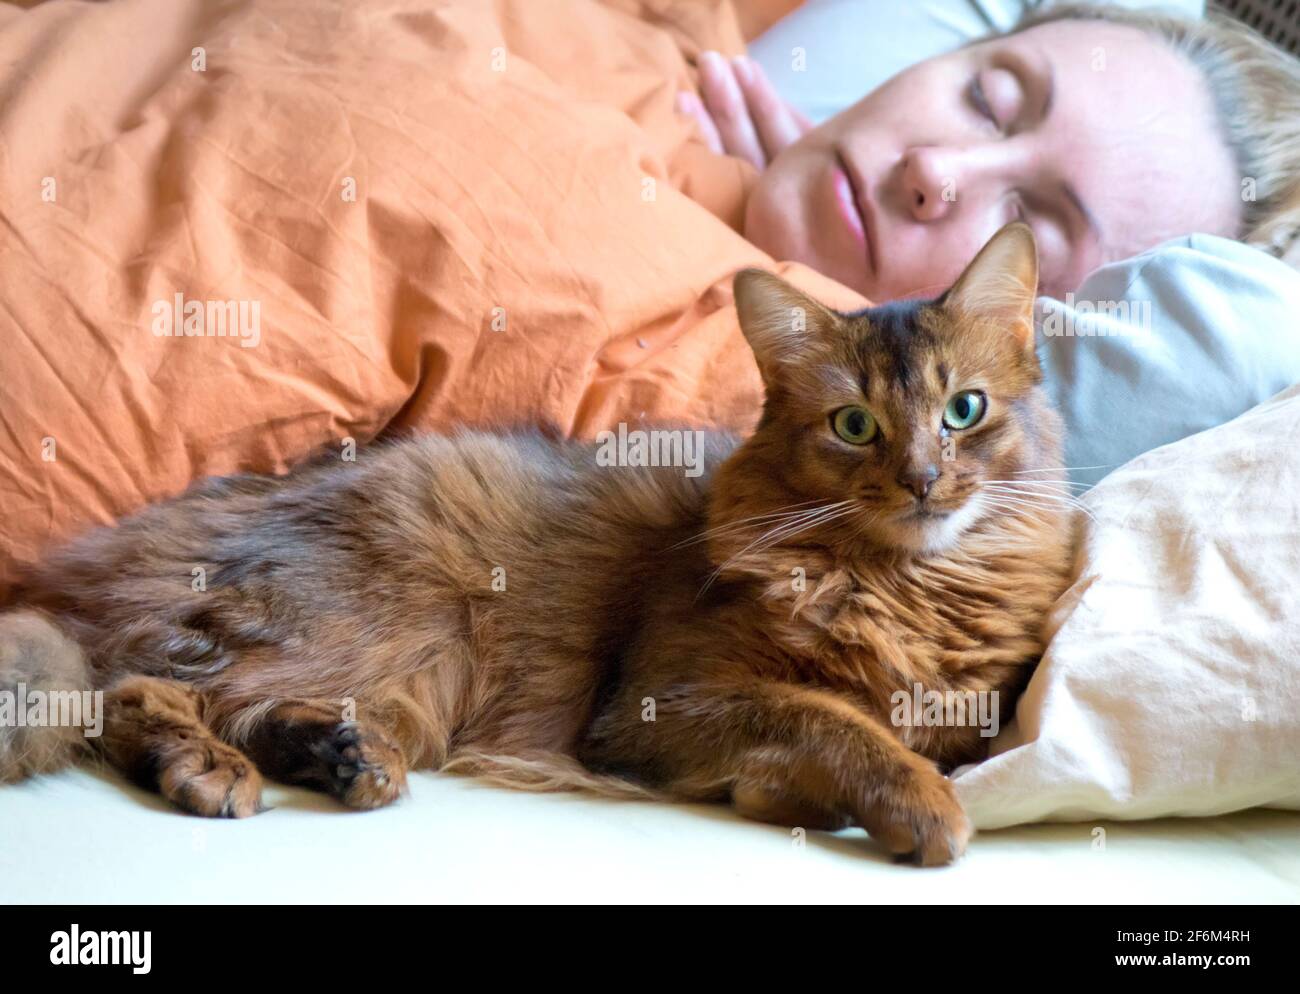 red fluffy cat of the Somali breed lies on the bed next to a sleeping woman Stock Photo